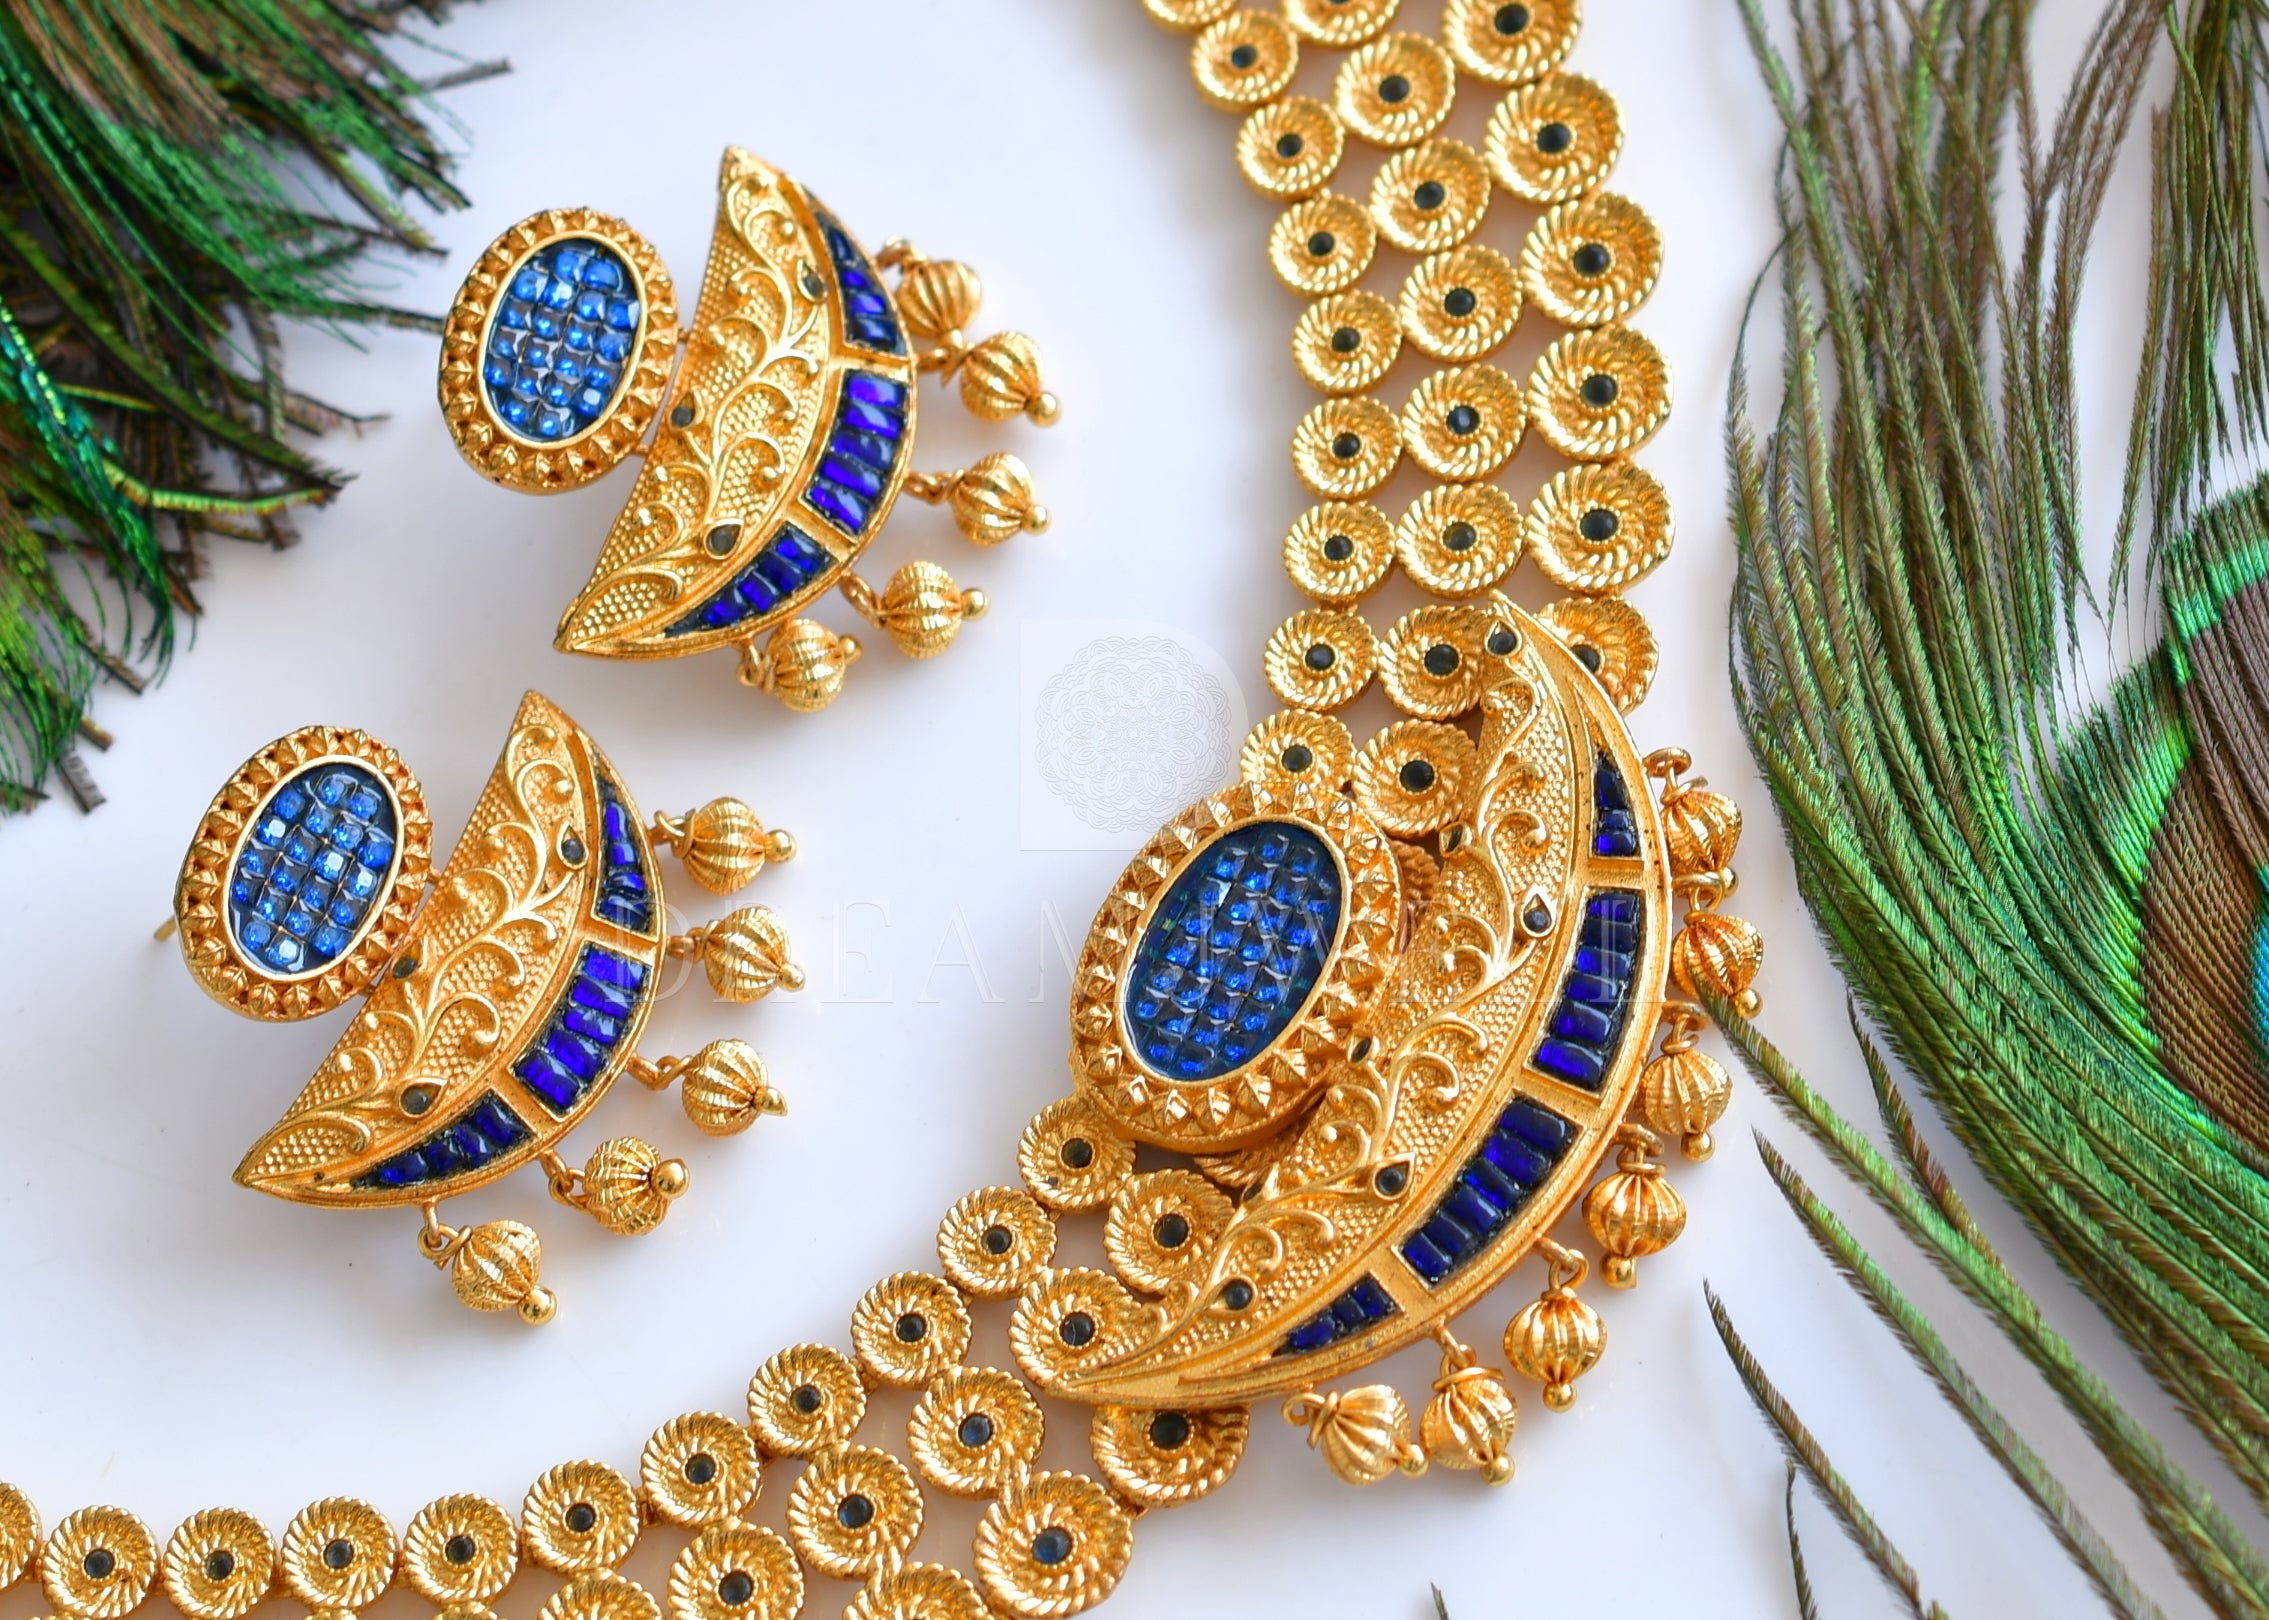 Magnificent Vaddanam Bridal One Gram Gold Jewellery Temple Designs H22137